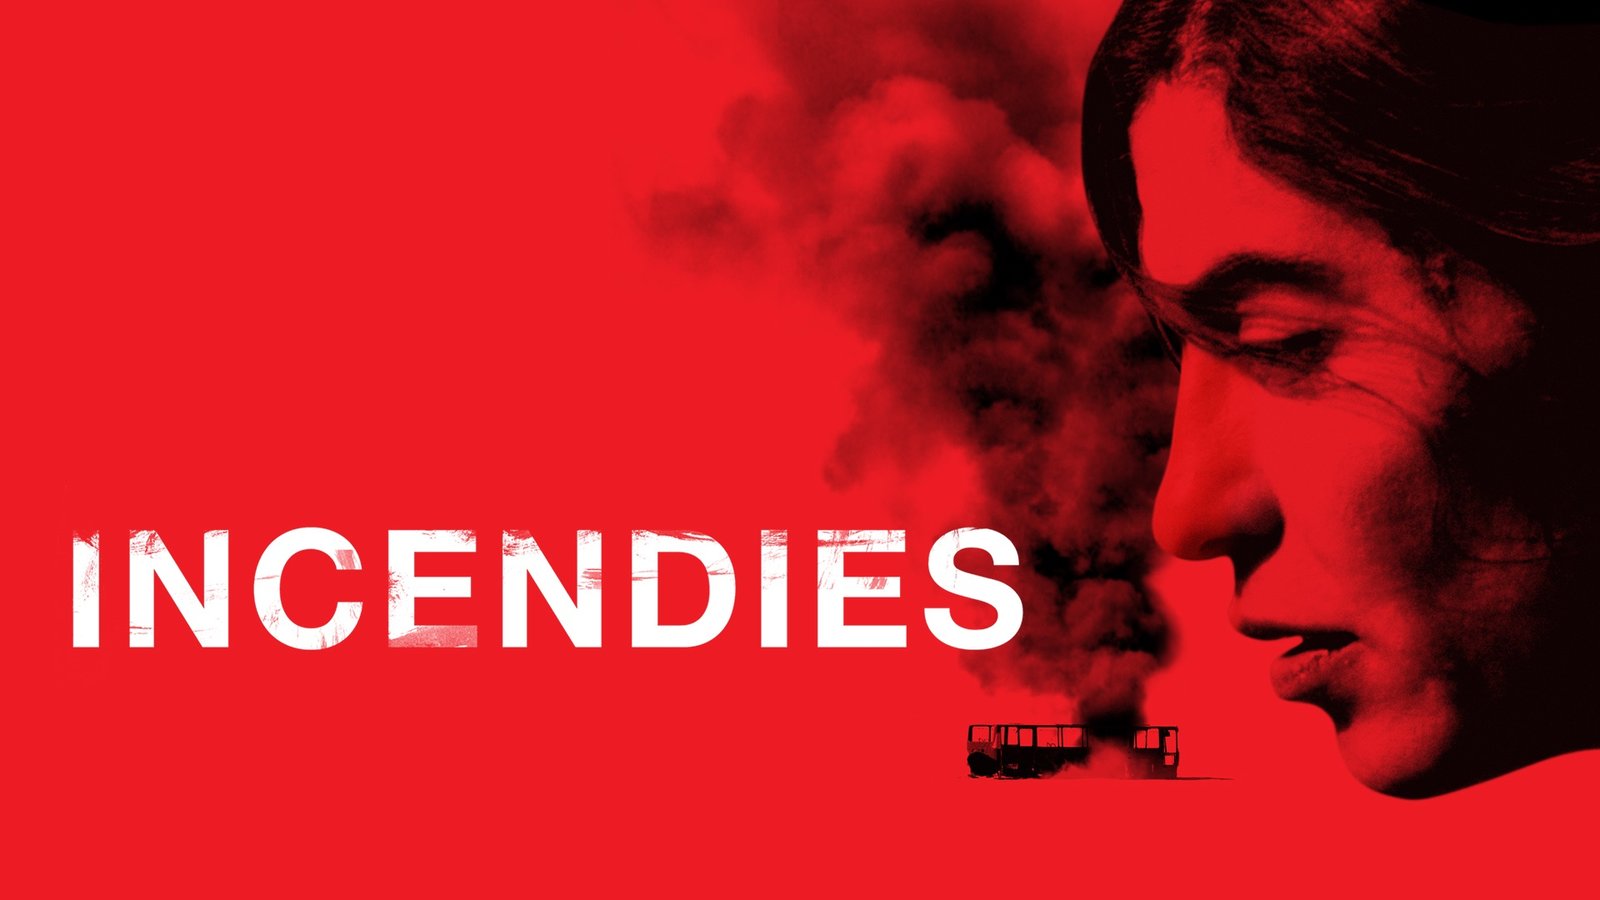 34-facts-about-the-movie-incendies